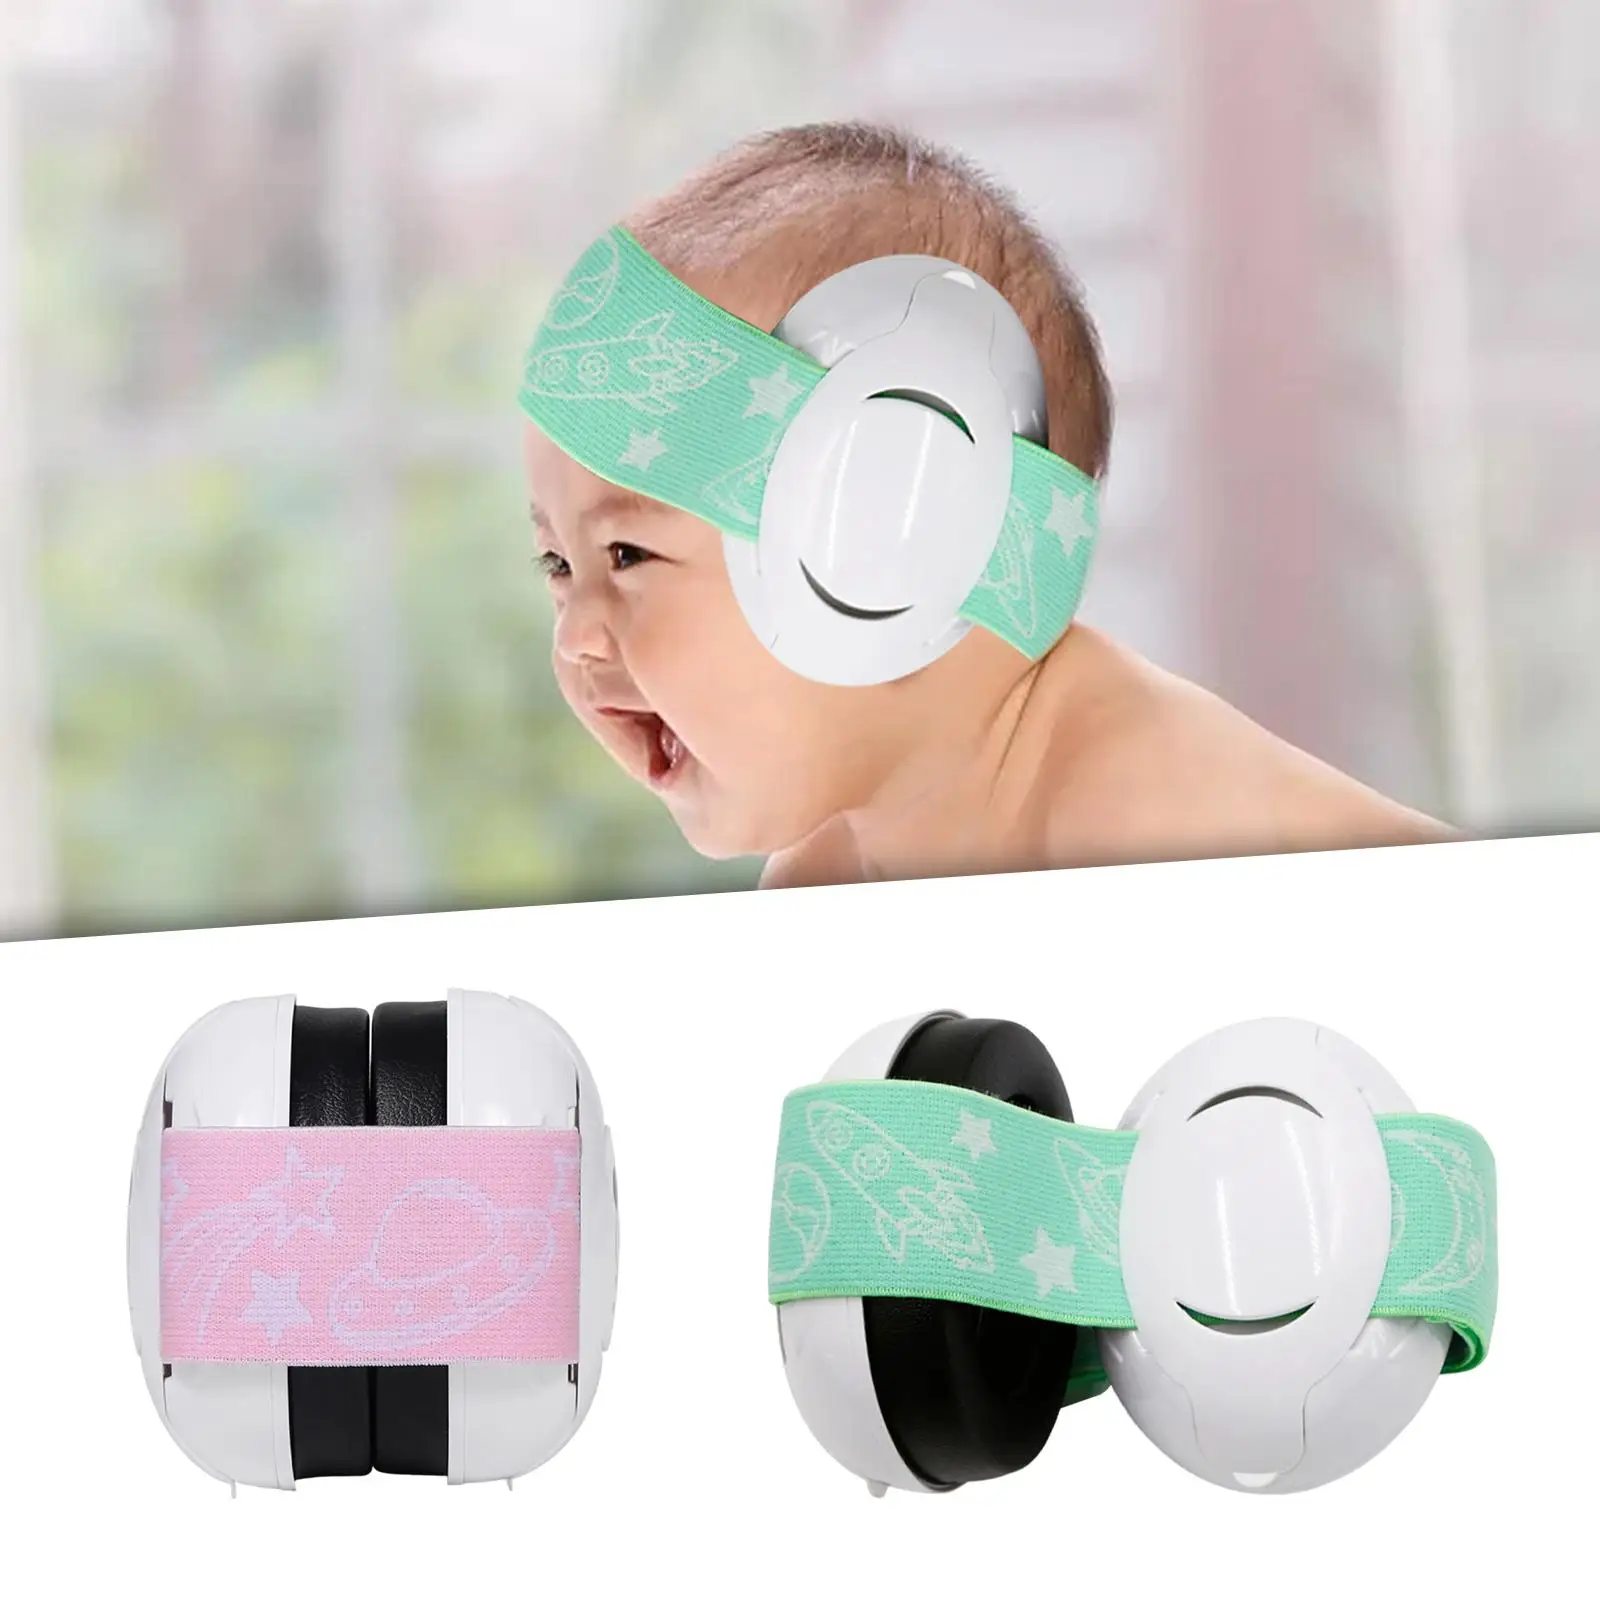 Baby Soundproof Earmuff Noise Eliminating Hearing Protection Earmuffs Quiet Sleep Ear Protection Headphones for Infant Toddler